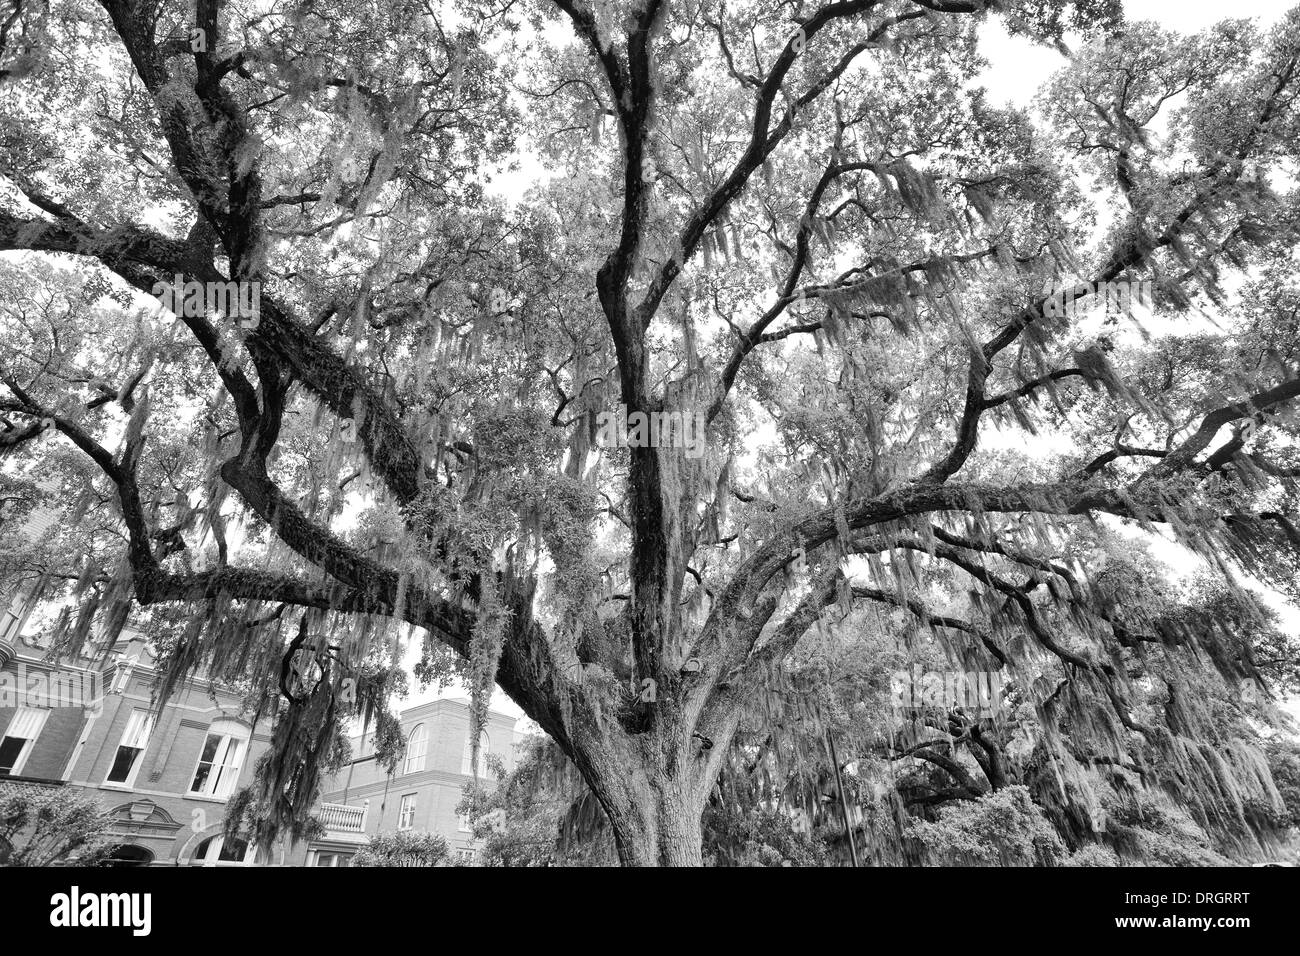 The famous live Southern Live Oaks covered in Spanish Moss growing in Savannah's historic squares. Savannah, Georgia Stock Photo